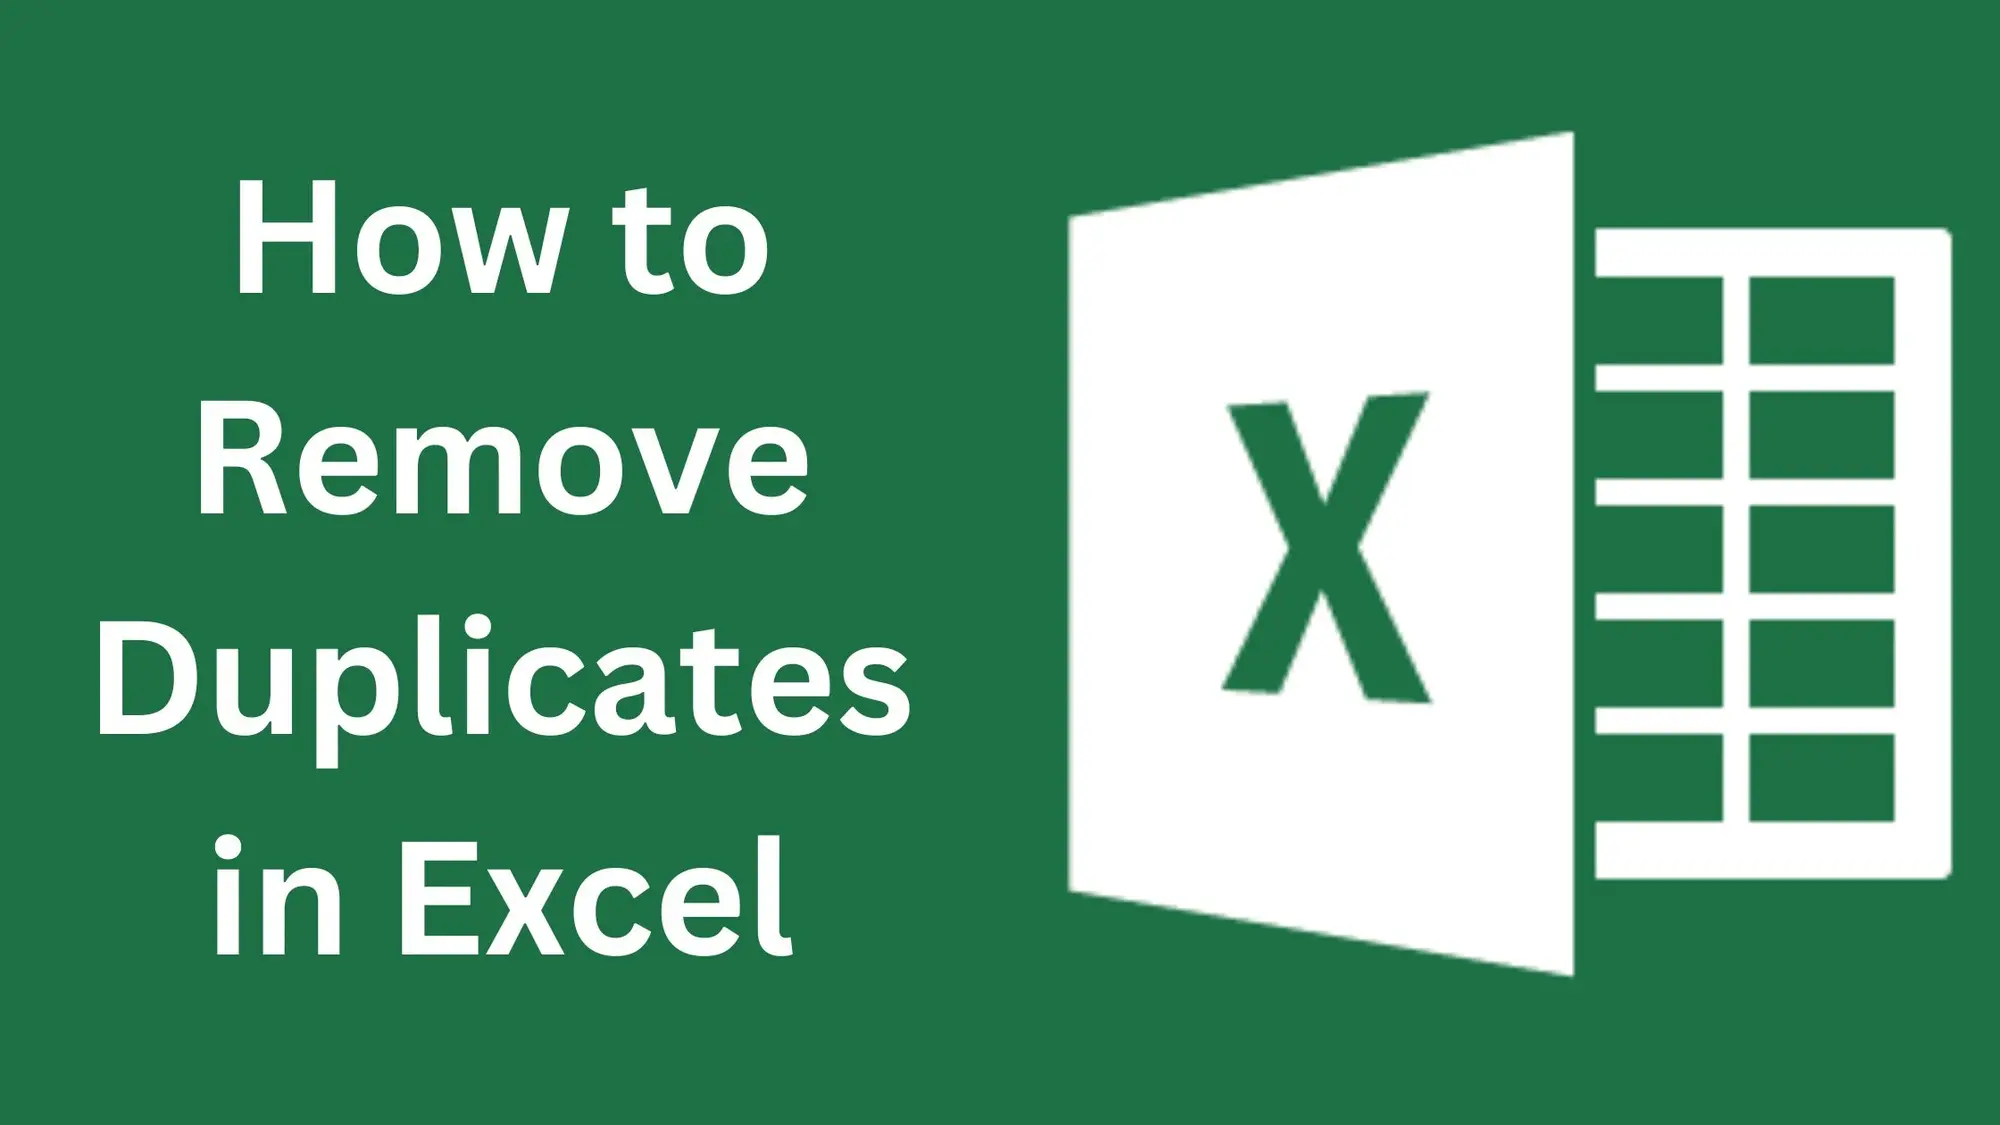 How To Remove Duplicates In Excel.webp